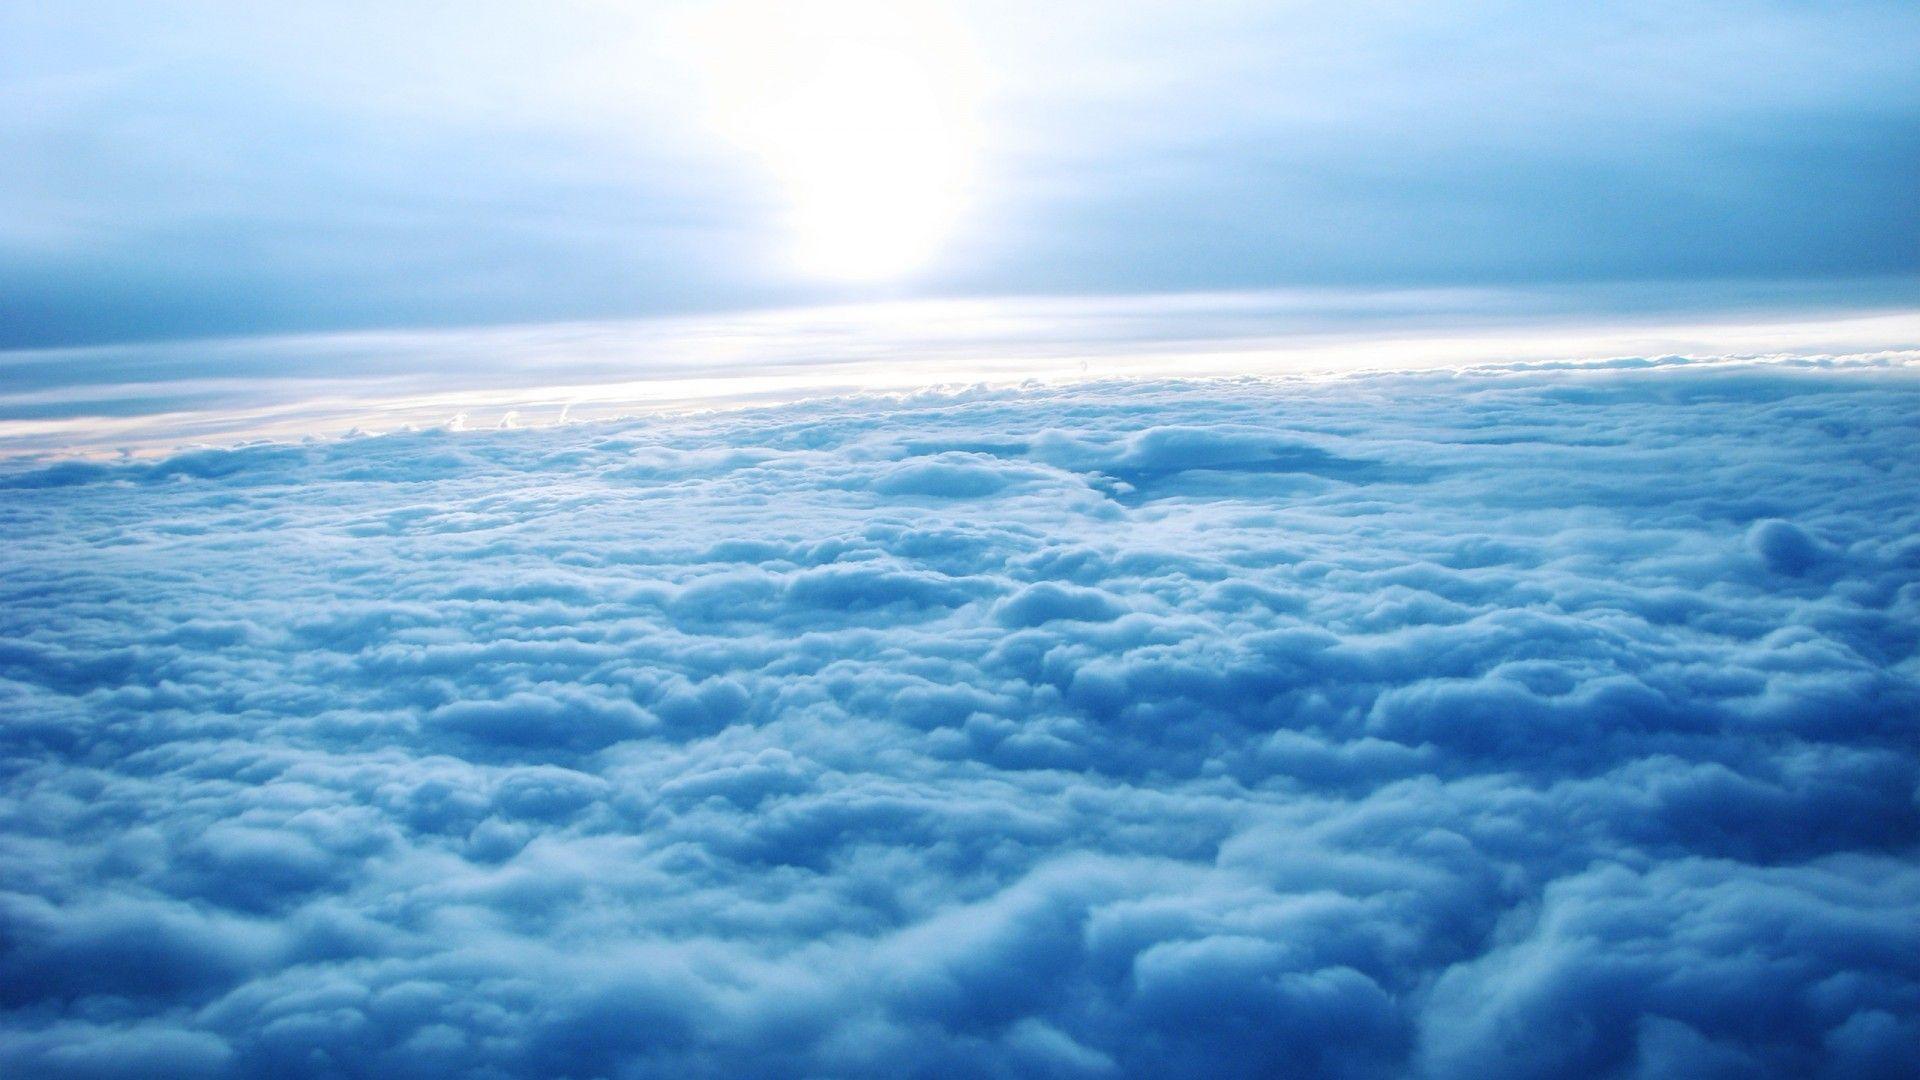 Above the Clouds Wallpaper 33849 1920x1080 px